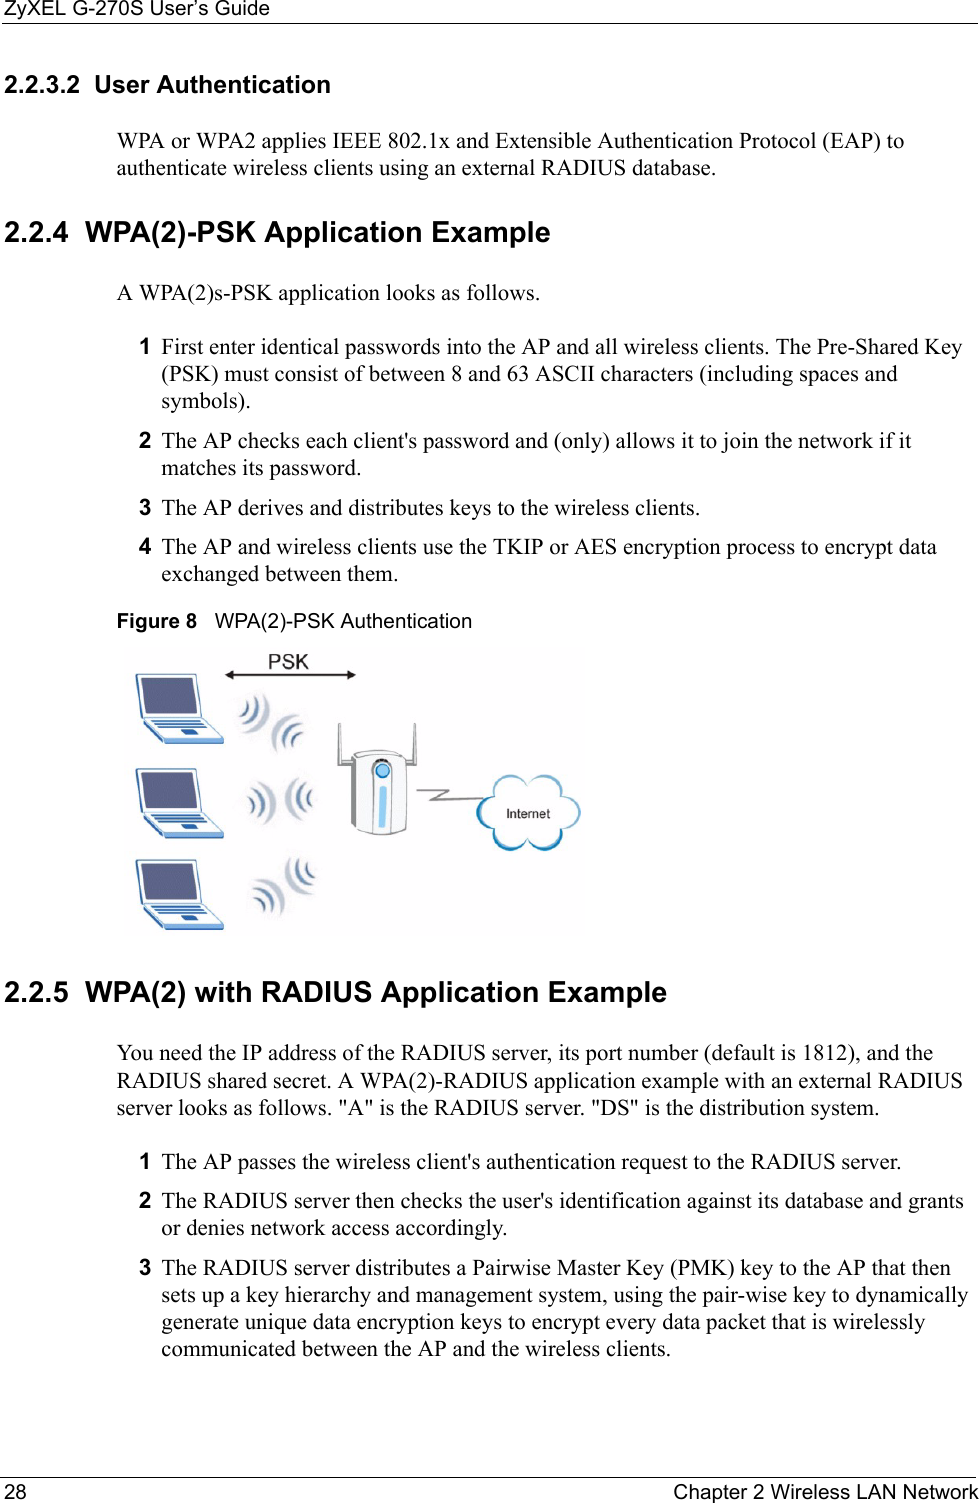 ZyXEL G-270S User’s Guide28 Chapter 2 Wireless LAN Network2.2.3.2  User Authentication WPA or WPA2 applies IEEE 802.1x and Extensible Authentication Protocol (EAP) to authenticate wireless clients using an external RADIUS database.2.2.4  WPA(2)-PSK Application ExampleA WPA(2)s-PSK application looks as follows.1First enter identical passwords into the AP and all wireless clients. The Pre-Shared Key (PSK) must consist of between 8 and 63 ASCII characters (including spaces and symbols).2The AP checks each client&apos;s password and (only) allows it to join the network if it matches its password.3The AP derives and distributes keys to the wireless clients.4The AP and wireless clients use the TKIP or AES encryption process to encrypt data exchanged between them.Figure 8   WPA(2)-PSK Authentication2.2.5  WPA(2) with RADIUS Application ExampleYou need the IP address of the RADIUS server, its port number (default is 1812), and the RADIUS shared secret. A WPA(2)-RADIUS application example with an external RADIUS server looks as follows. &quot;A&quot; is the RADIUS server. &quot;DS&quot; is the distribution system.1The AP passes the wireless client&apos;s authentication request to the RADIUS server.2The RADIUS server then checks the user&apos;s identification against its database and grants or denies network access accordingly.3The RADIUS server distributes a Pairwise Master Key (PMK) key to the AP that then sets up a key hierarchy and management system, using the pair-wise key to dynamically generate unique data encryption keys to encrypt every data packet that is wirelessly communicated between the AP and the wireless clients.